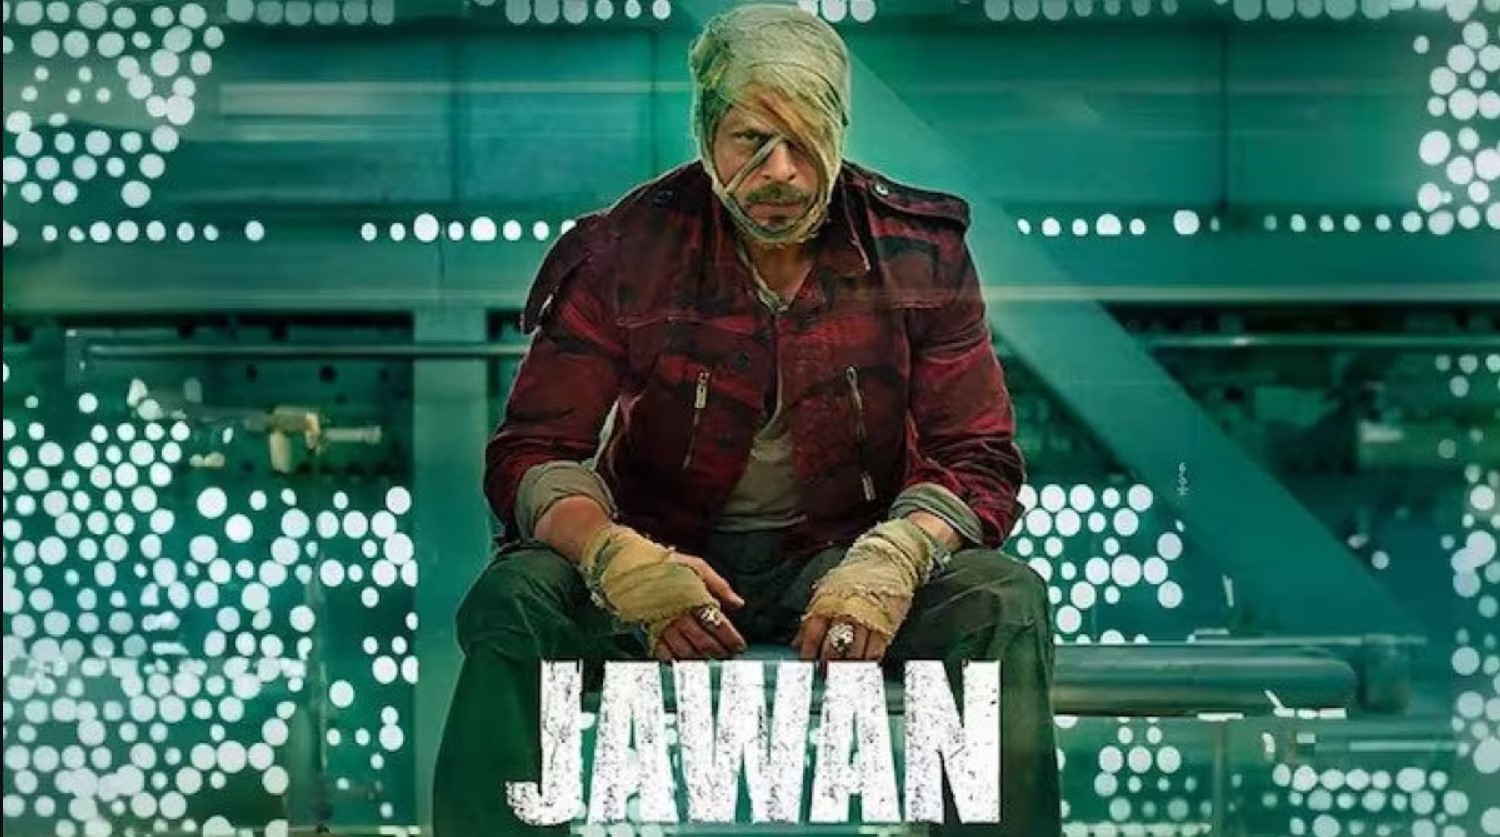 Shah Rukh Khan's Action-Packed 'Jawan' became the highest-grossing Hindi film on its opening day - GK Now thumbnail